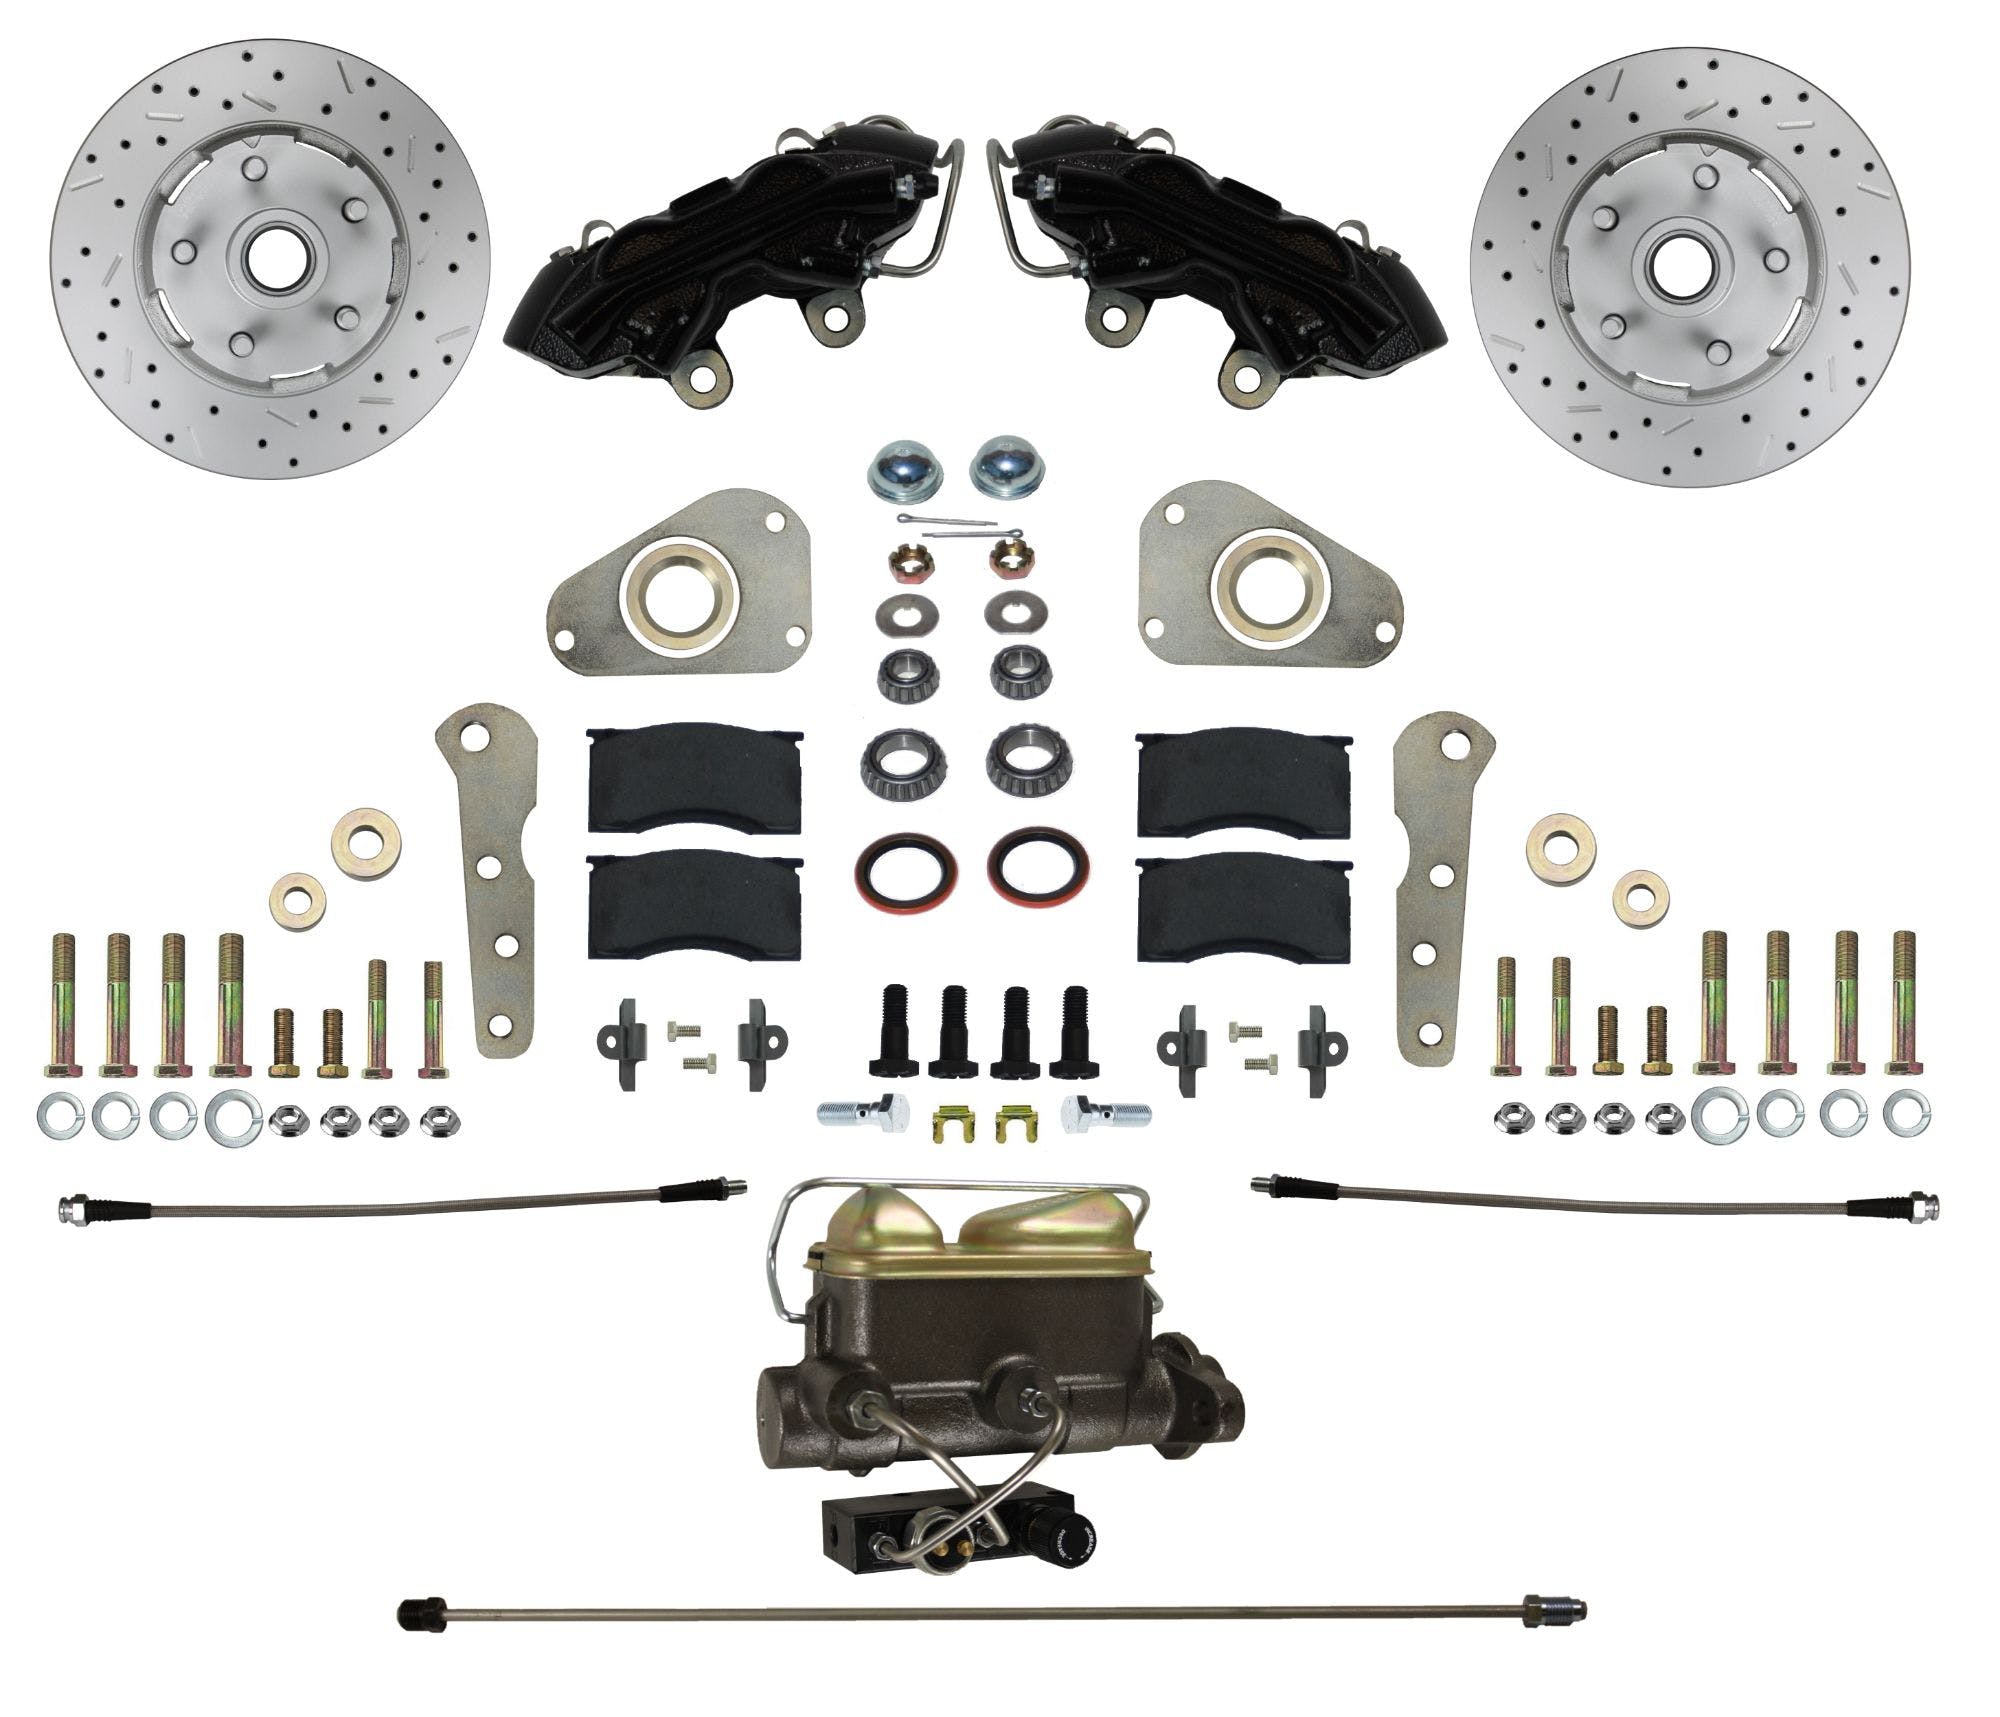 LEED Brakes BFC0025-405X Ford Full Size Manual Disc Conversion Kit with MaxGrip XDS - Black Powder Coat